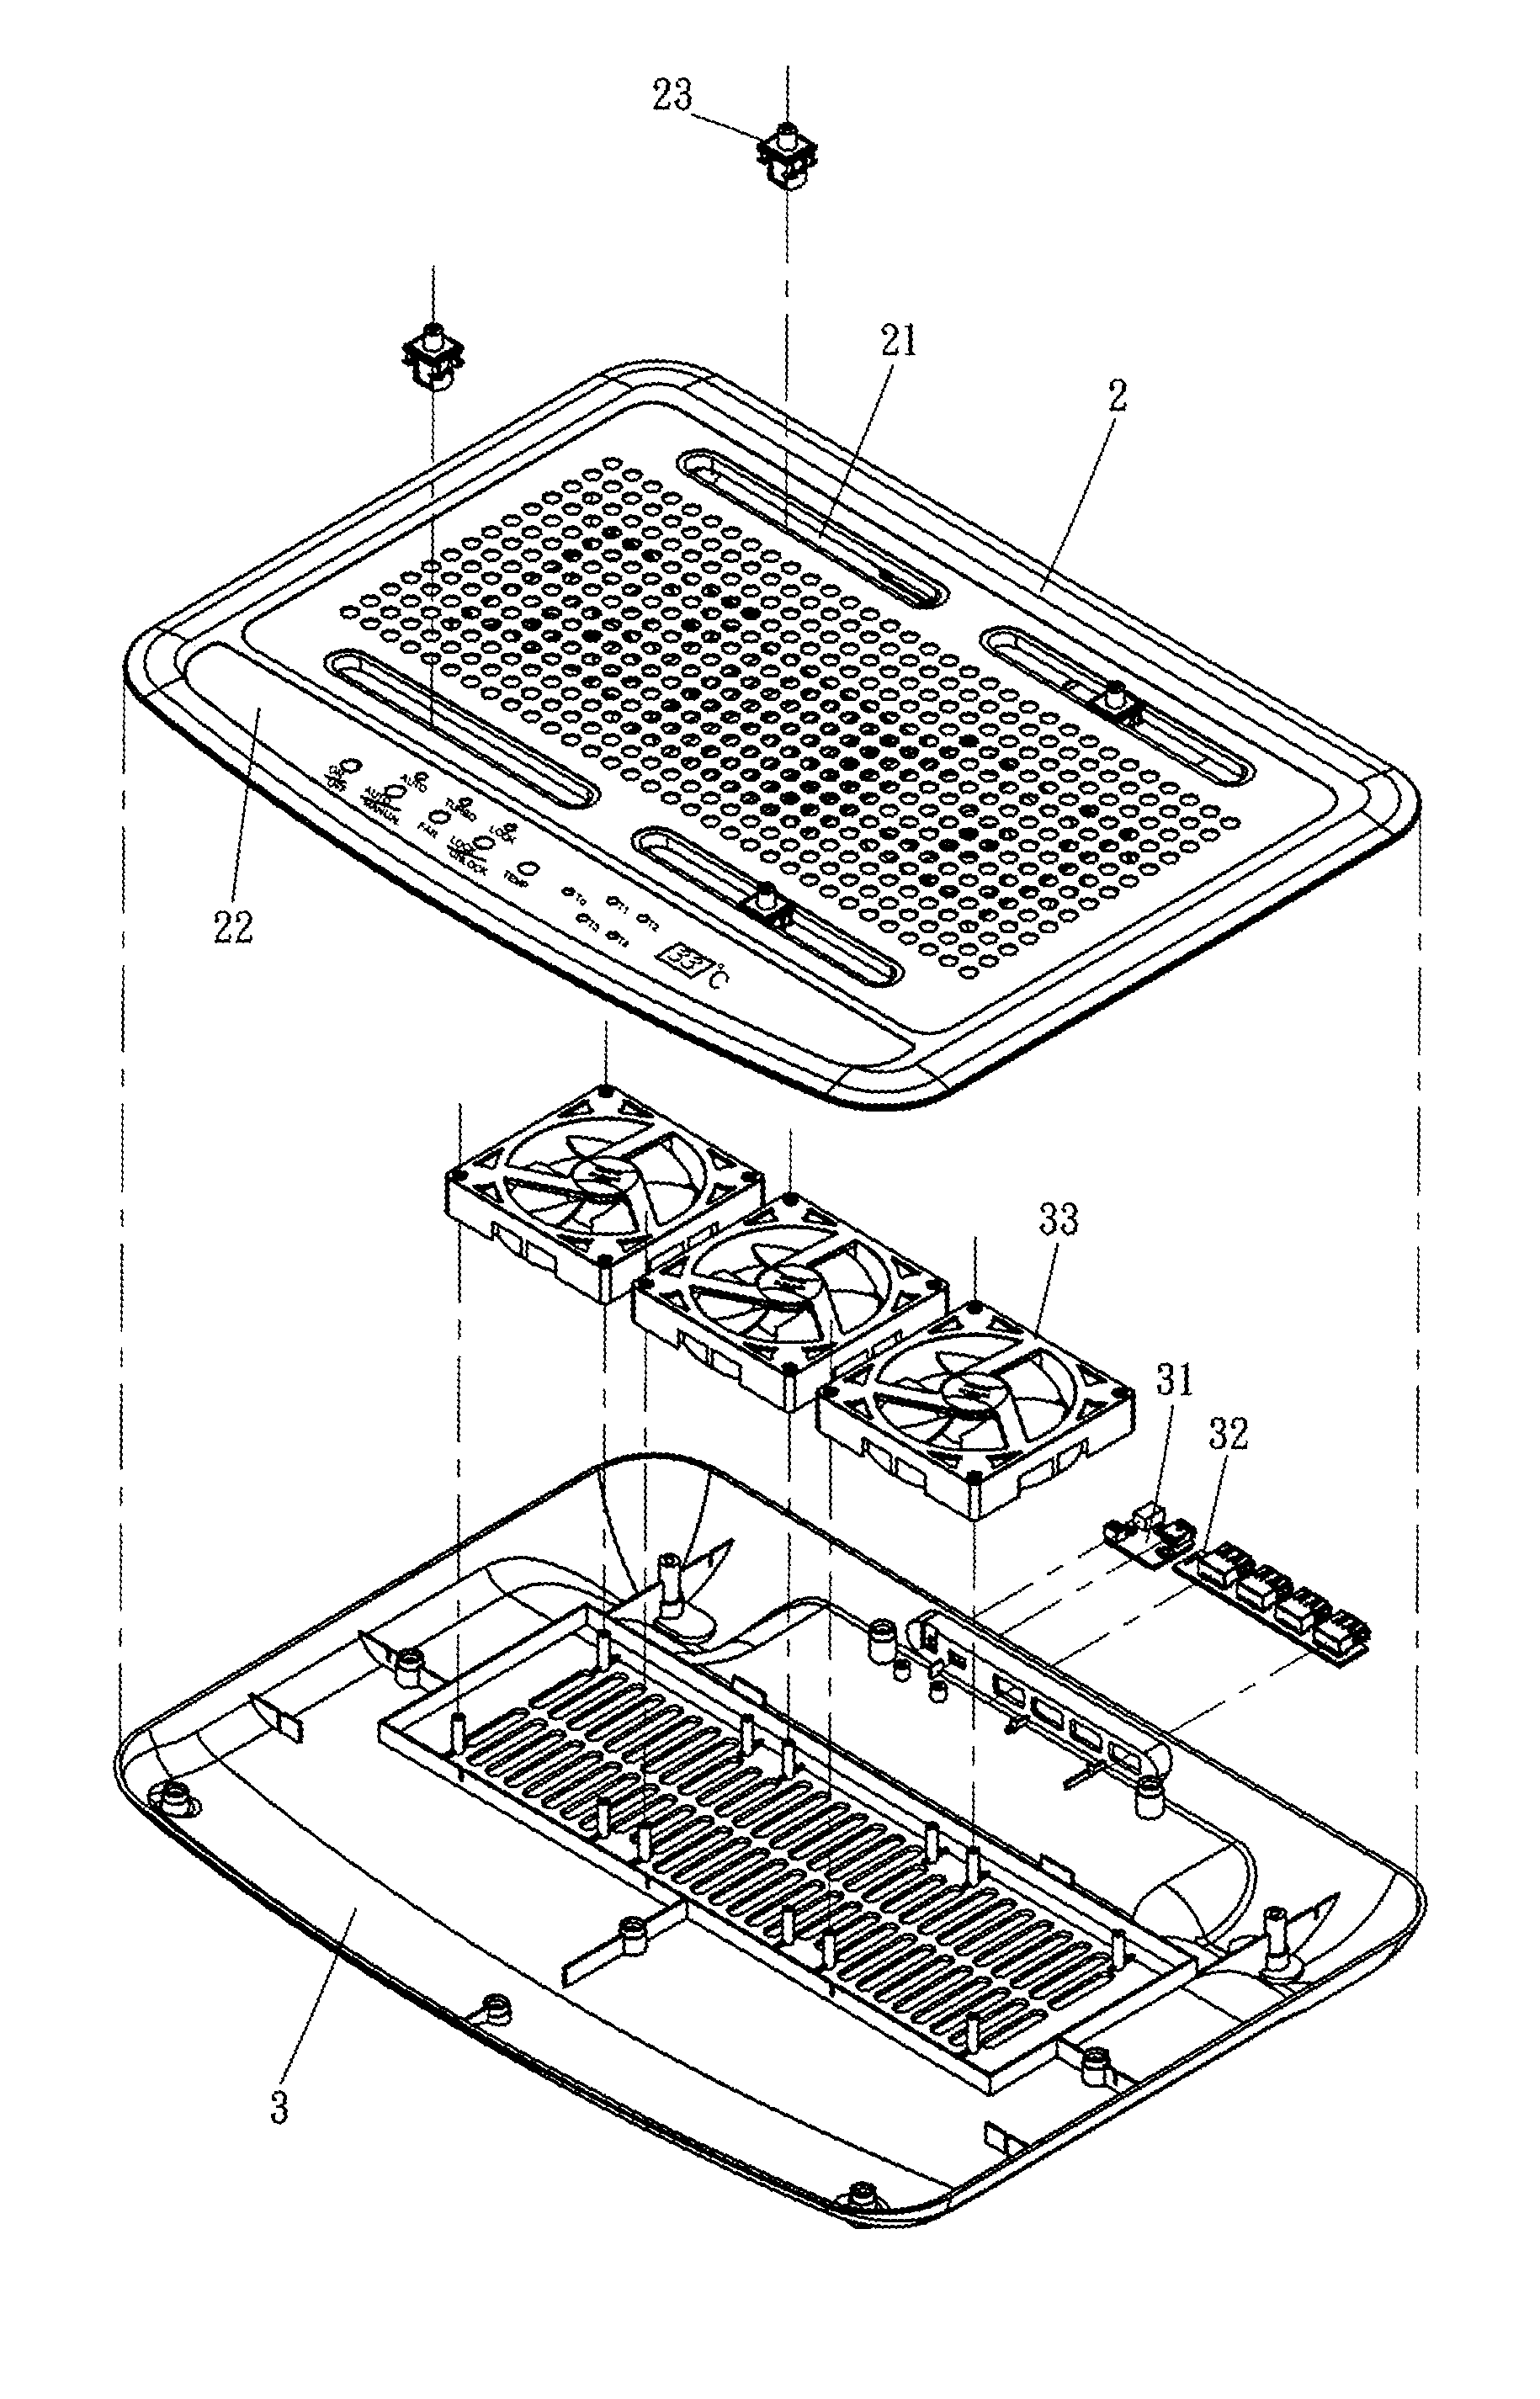 Notebook computer cooling pad capable of temperature detection and fan-speed adjustment